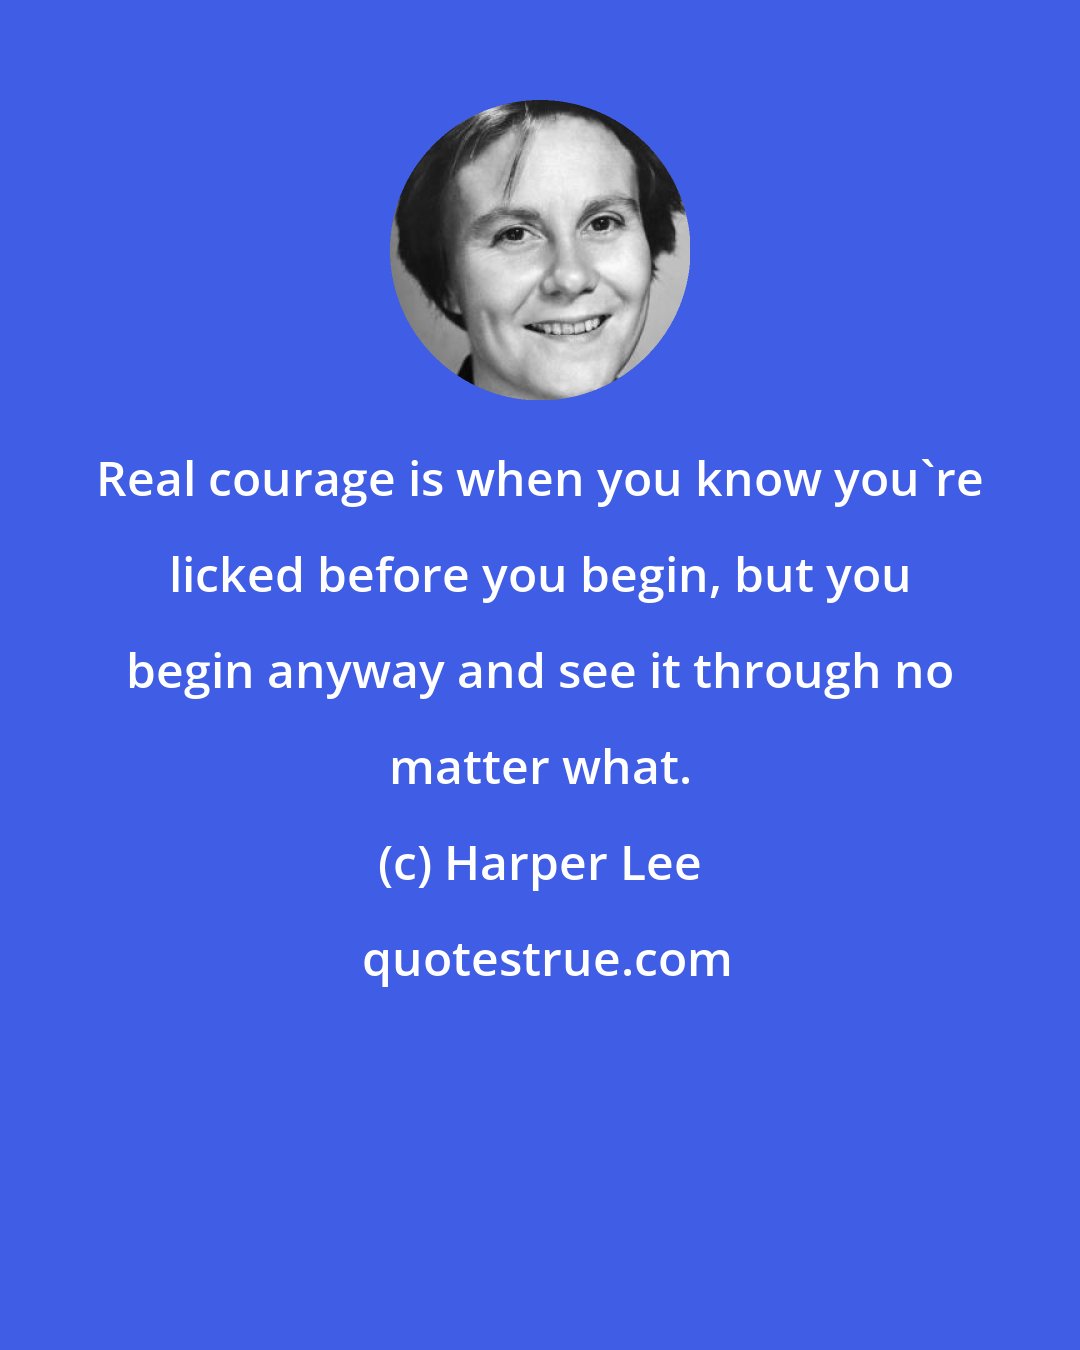 Harper Lee: Real courage is when you know you're licked before you begin, but you begin anyway and see it through no matter what.